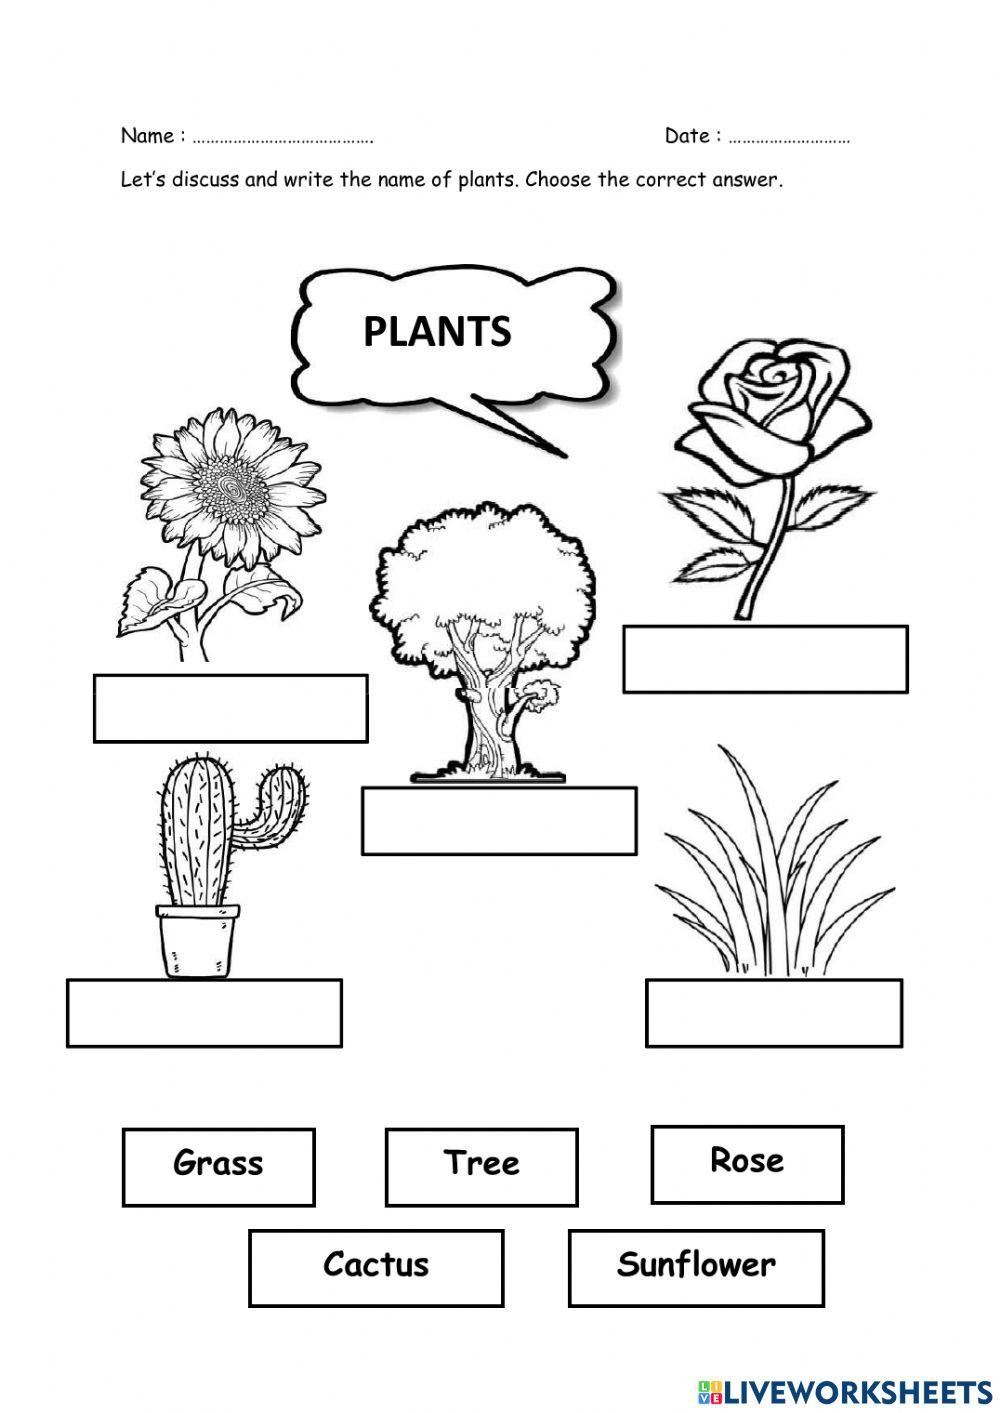 Plant and flower names